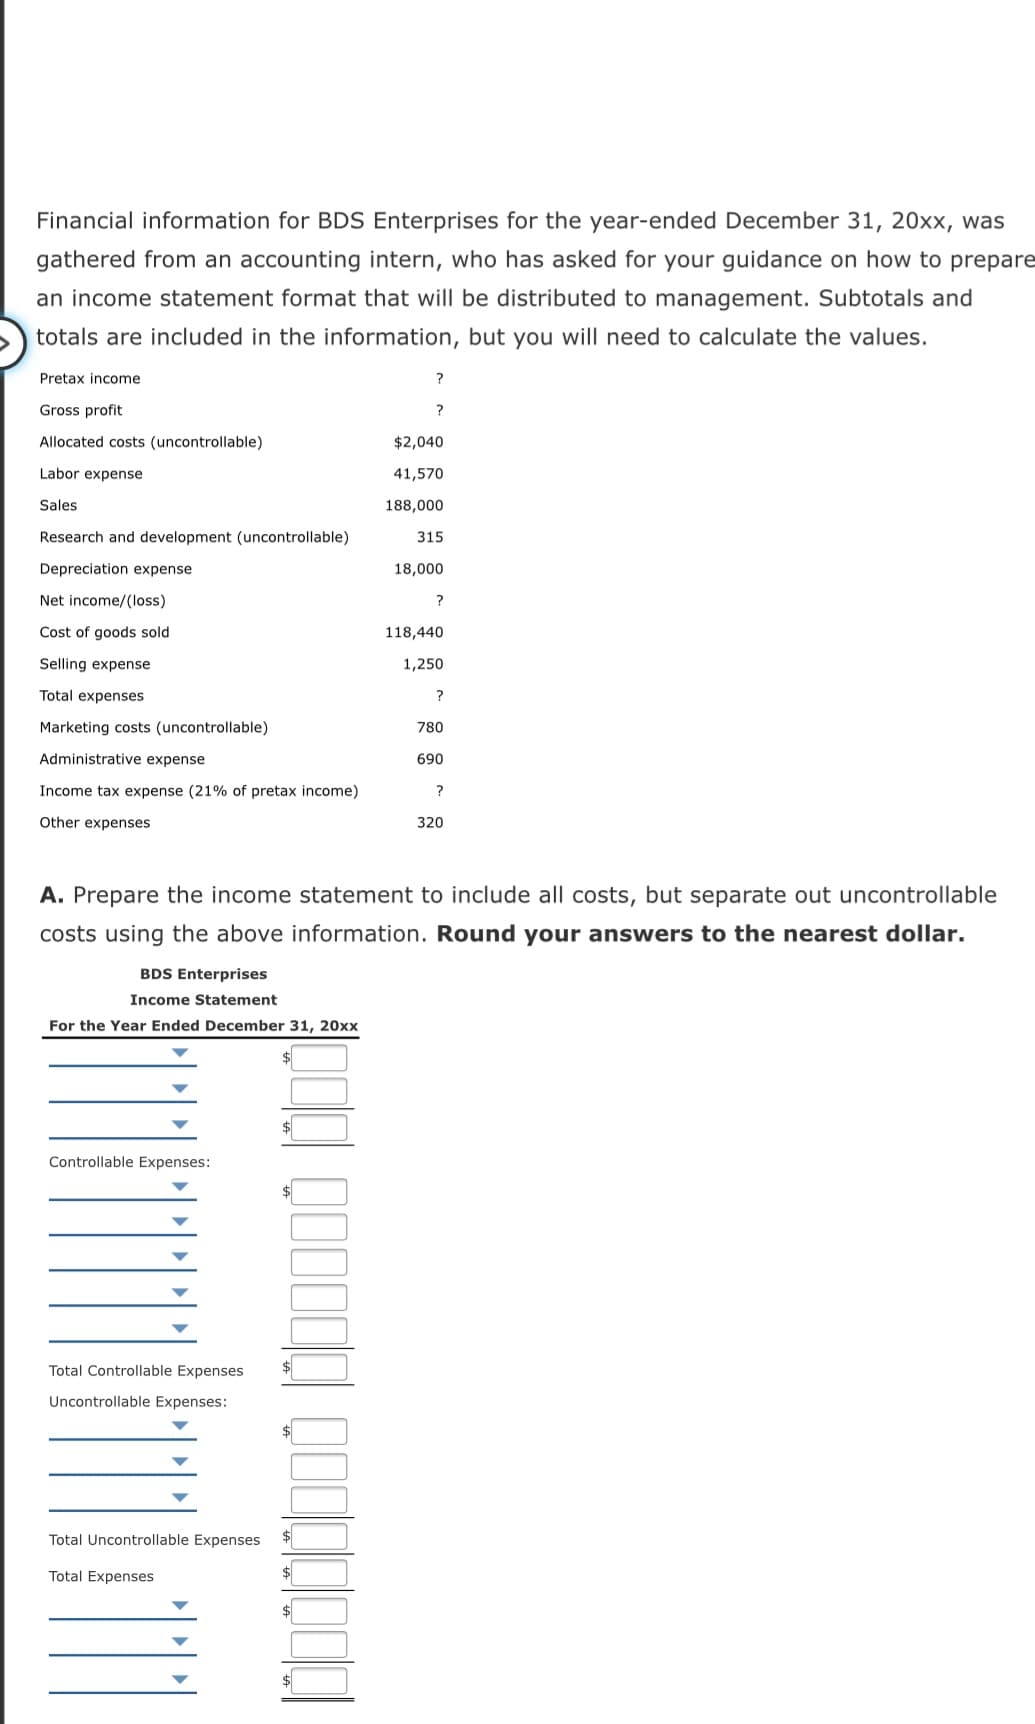 Financial information for BDS Enterprises for the year-ended December 31, 20xx, was
gathered from an accounting intern, who has asked for your guidance on how to prepare
an income statement format that will be distributed to management. Subtotals and
totals are included in the information, but you will need to calculate the values.
Pretax income
?
Gross profit
?
Allocated costs (uncontrollable)
$2,040
Labor expense
41,570
Sales
188,000
Research and development (uncontrollable)
315
Depreciation expense
18,000
Net income/(loss)
?
Cost of goods sold
118,440
Selling expense
1,250
Total expenses
Marketing costs (uncontrollable)
780
Administrative expense
690
Income tax expense (21% of pretax income)
?
Other expenses
320
A. Prepare the income statement to include all costs, but separate out uncontrollable
costs using the above information. Round your answers to the nearest dollar.
BDS Enterprises
Income Statement
For the Year Ended December 31, 20xx
Controllable Expenses:
Total Controllable Expenses
Uncontrollable Expenses:
Total Uncontrollable Expenses
Total Expenses
$
